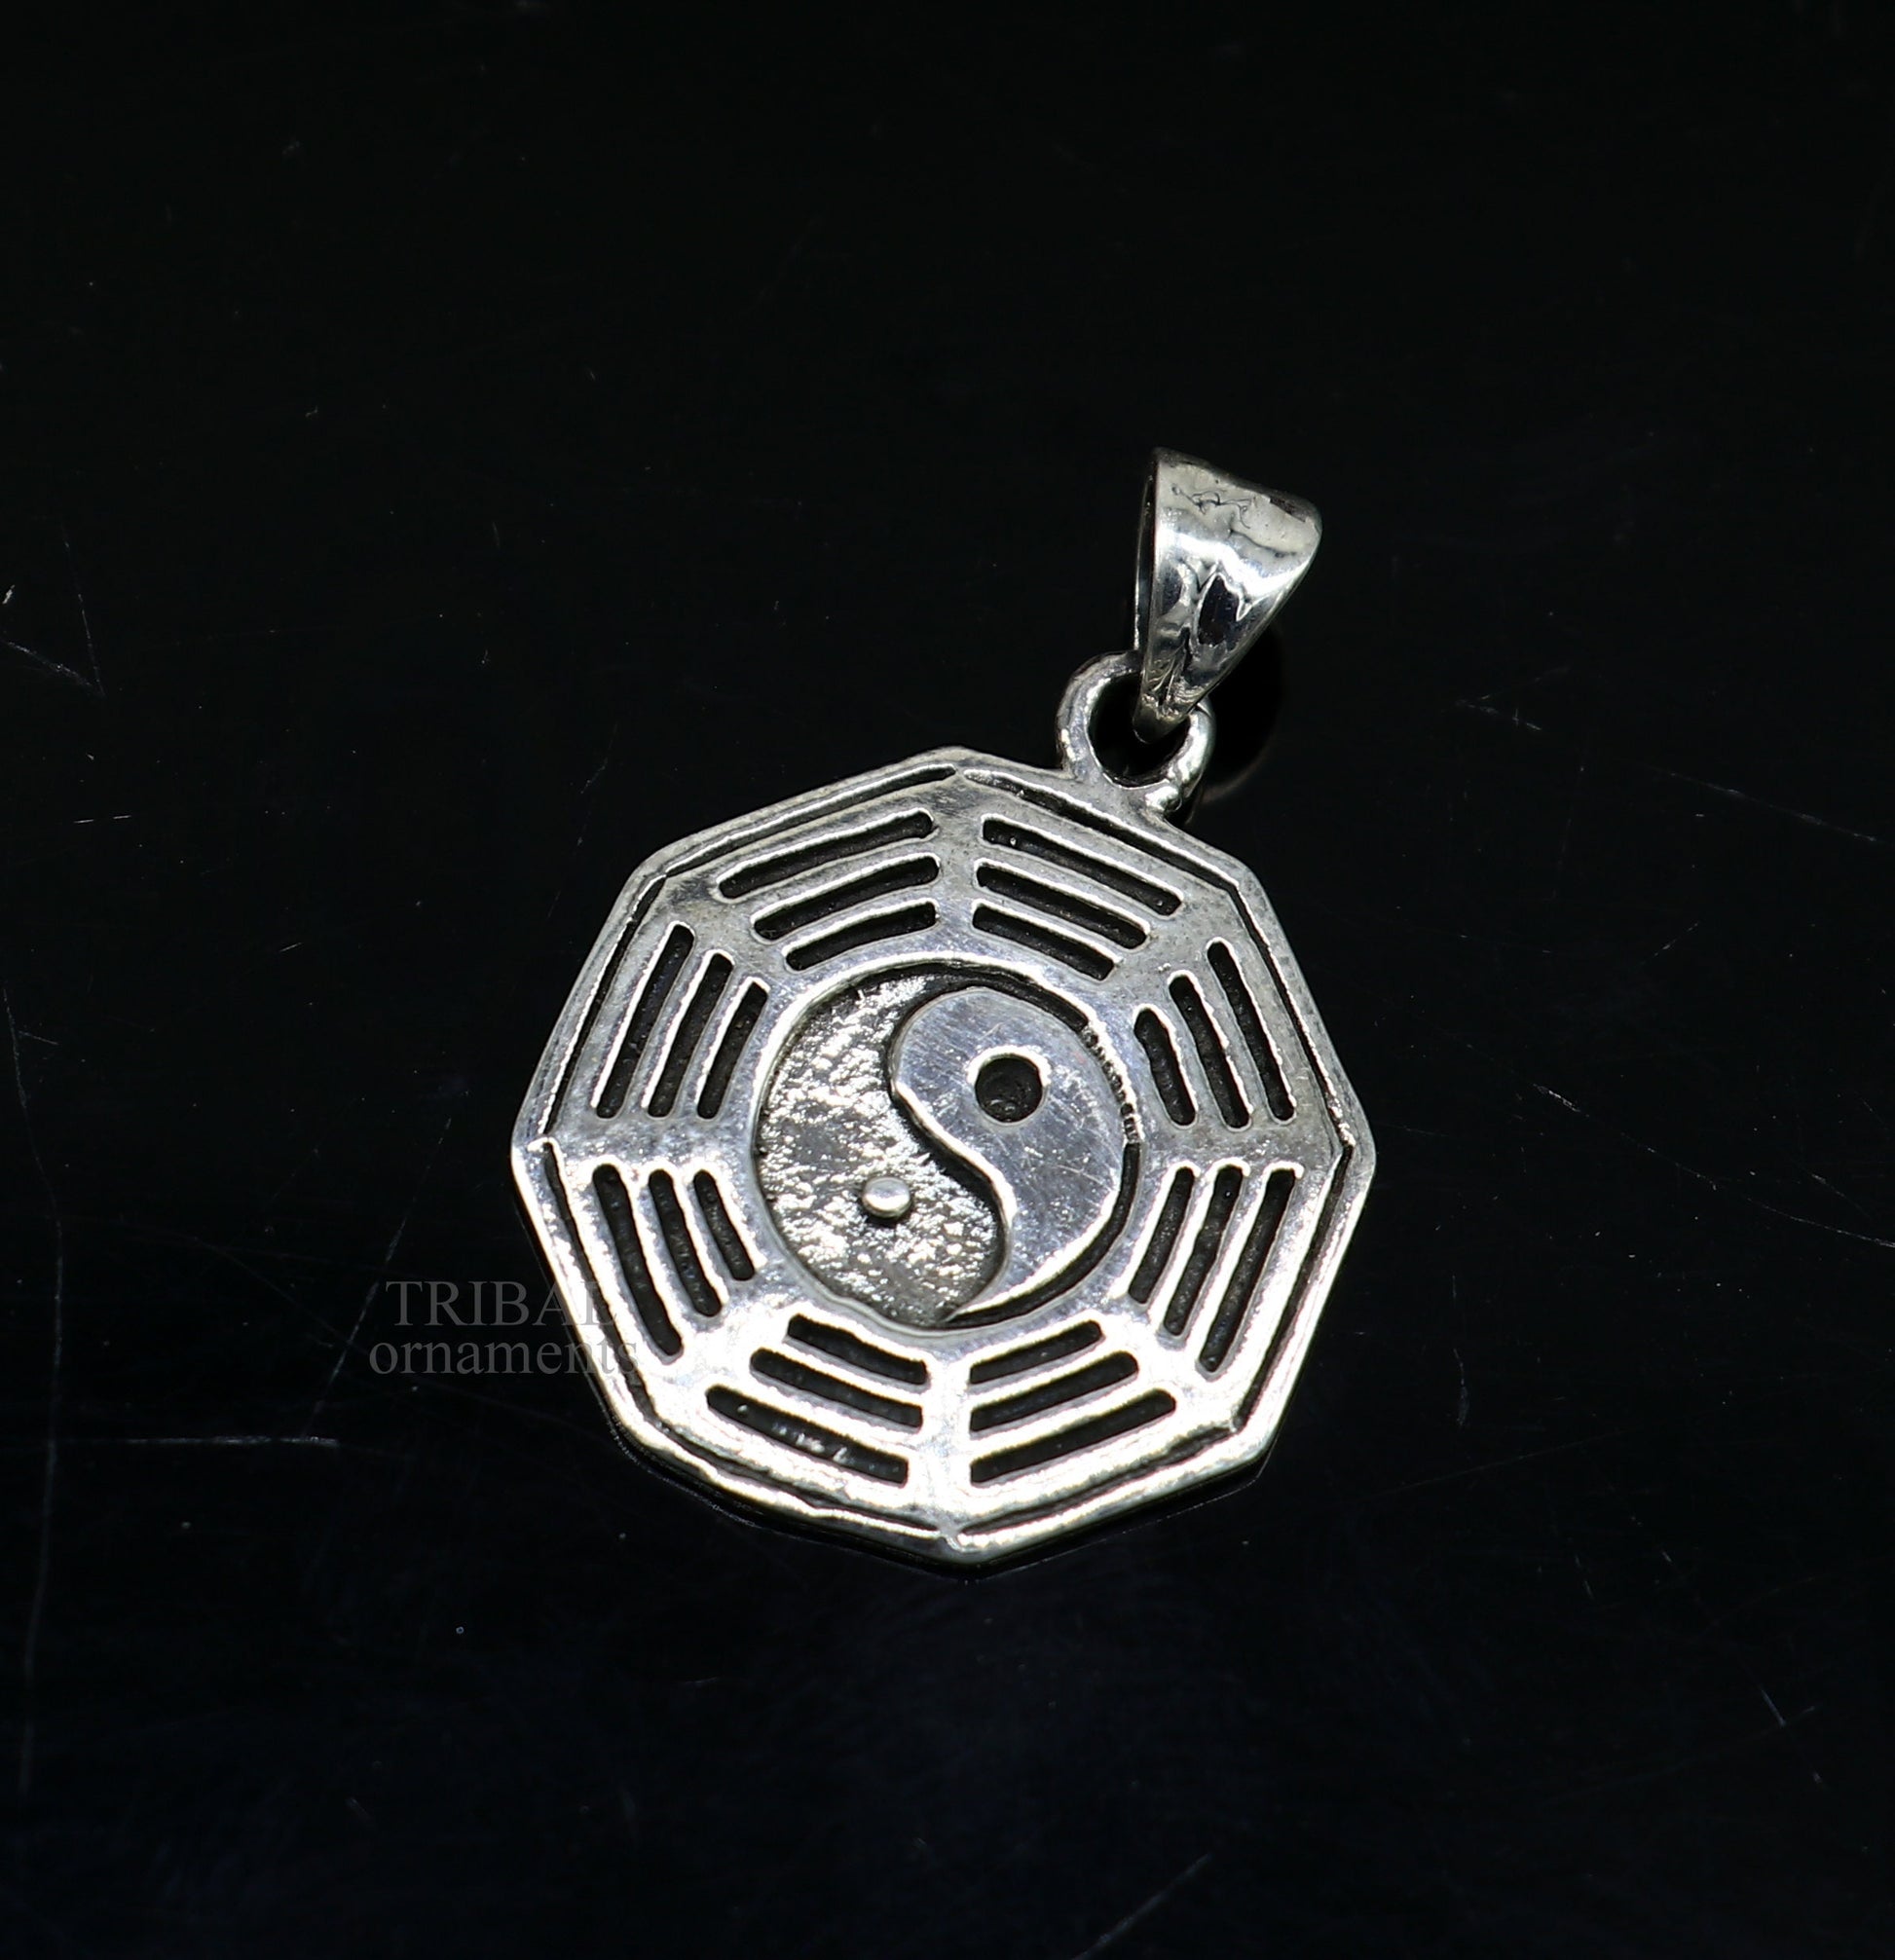 Exclusive design solid 925 sterling silver excellent unique design stylish unisex personalized gift pendant jewelry ssp1641 - TRIBAL ORNAMENTS